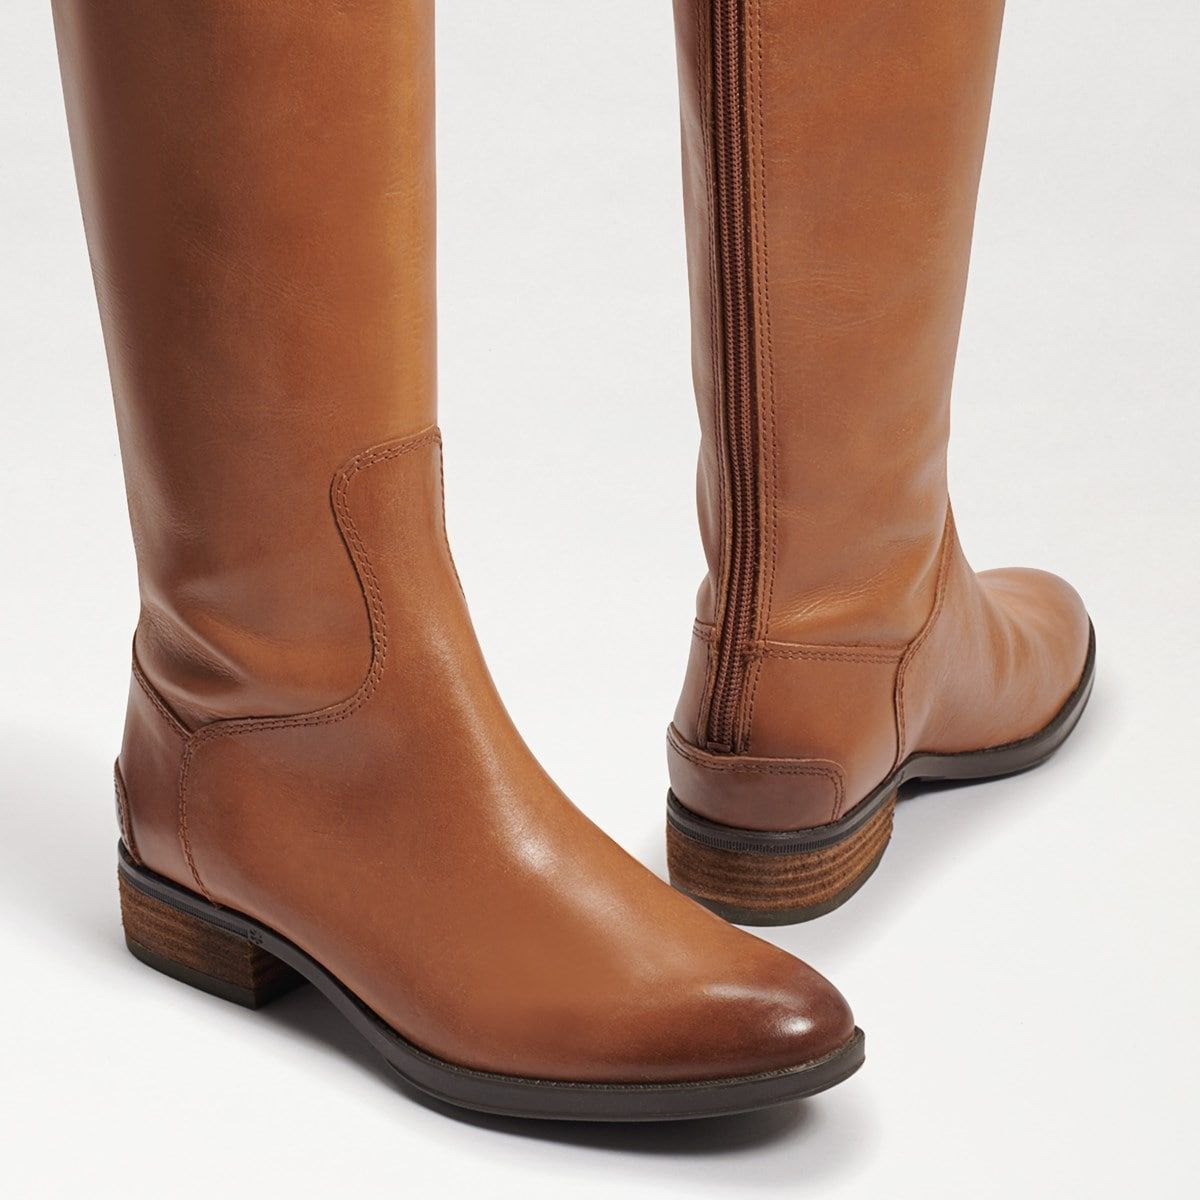 Penny Leather Riding Boot | Sam Edelman